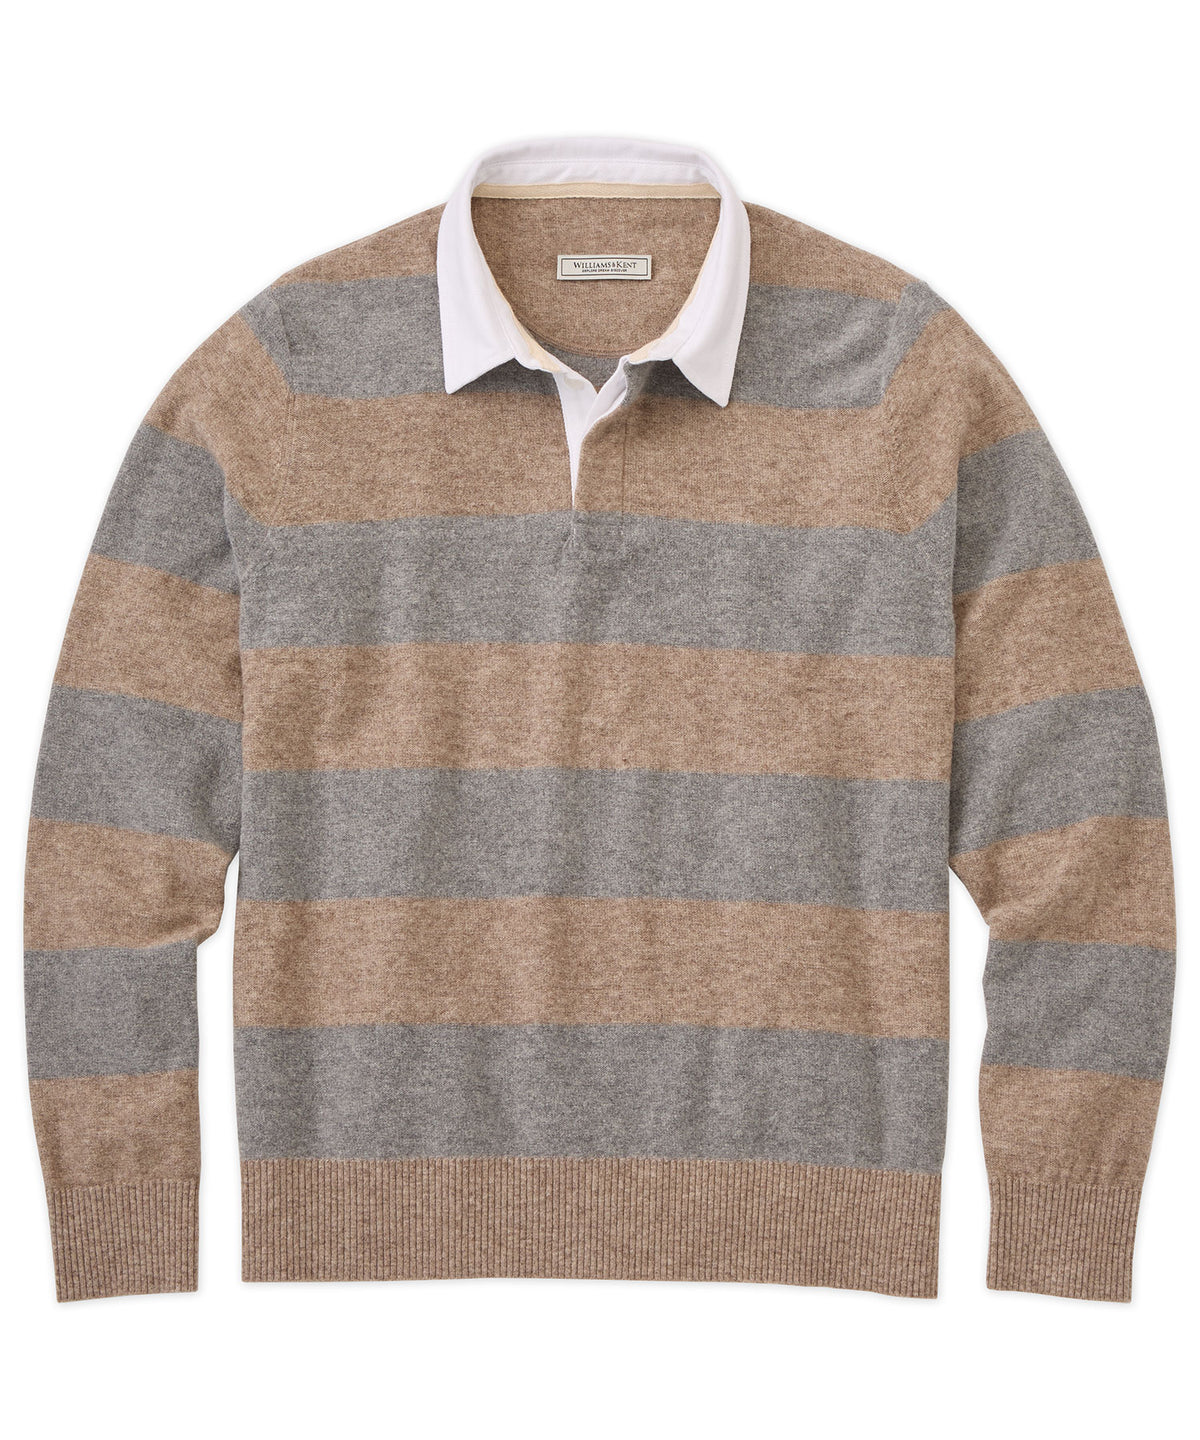 Rugby-Style Sweater